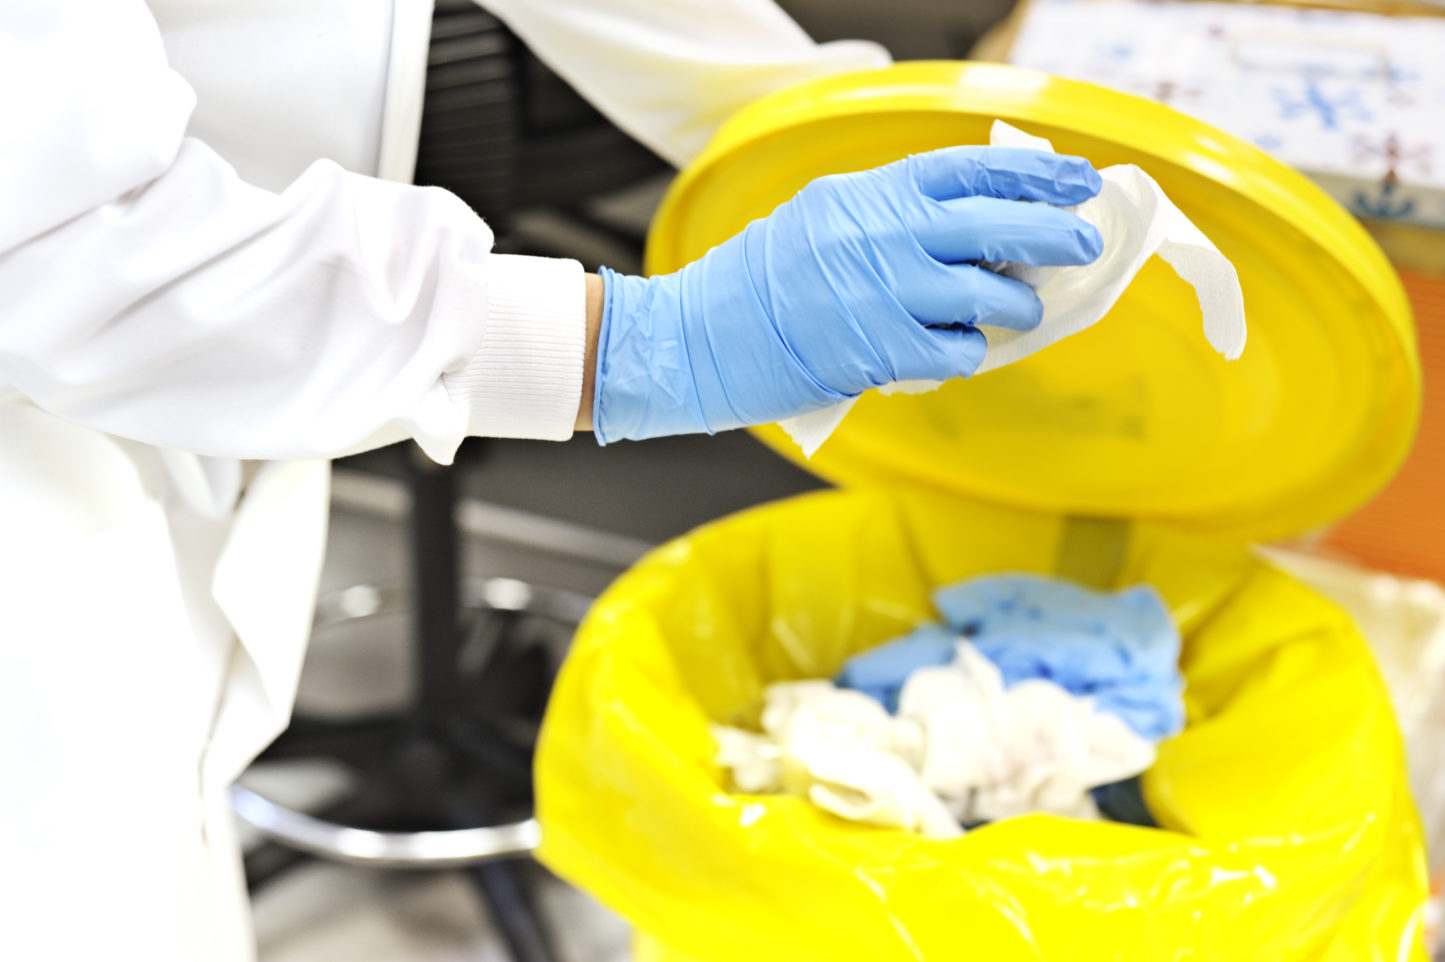 Lab worker putting biohazard items in regulated medical waste containers.